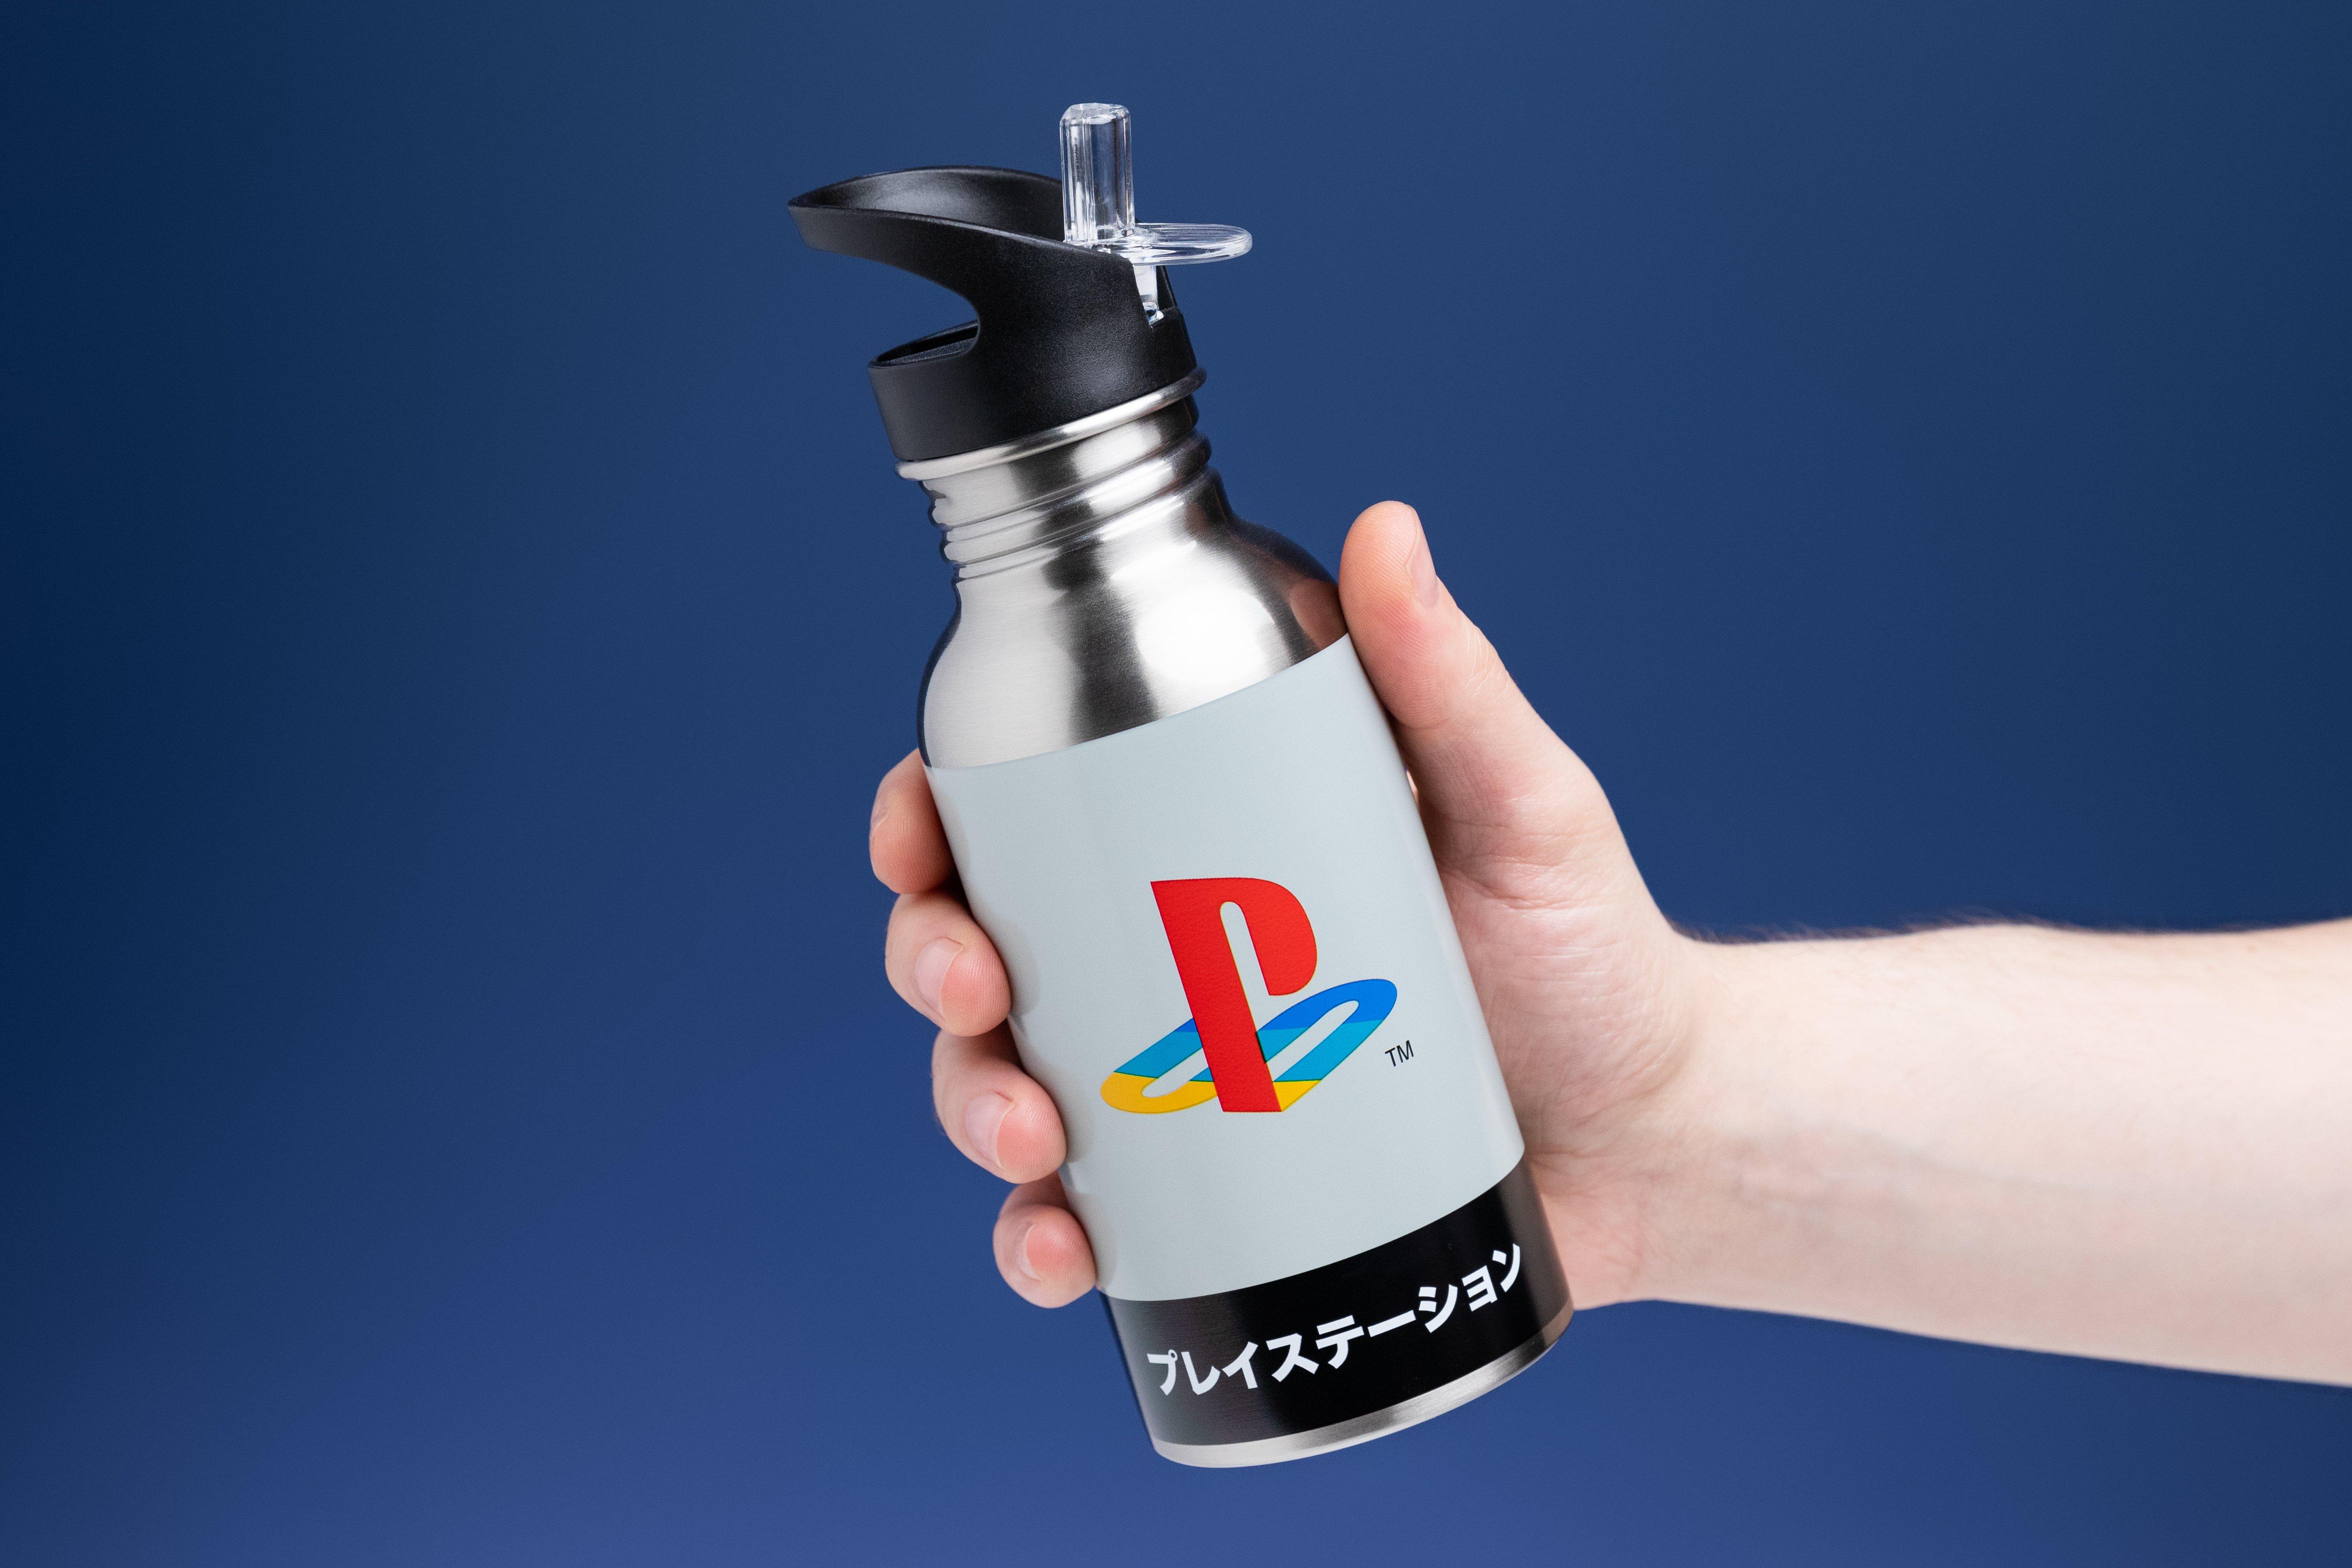 Playstation Heritage Metal Water Bottle with Straw